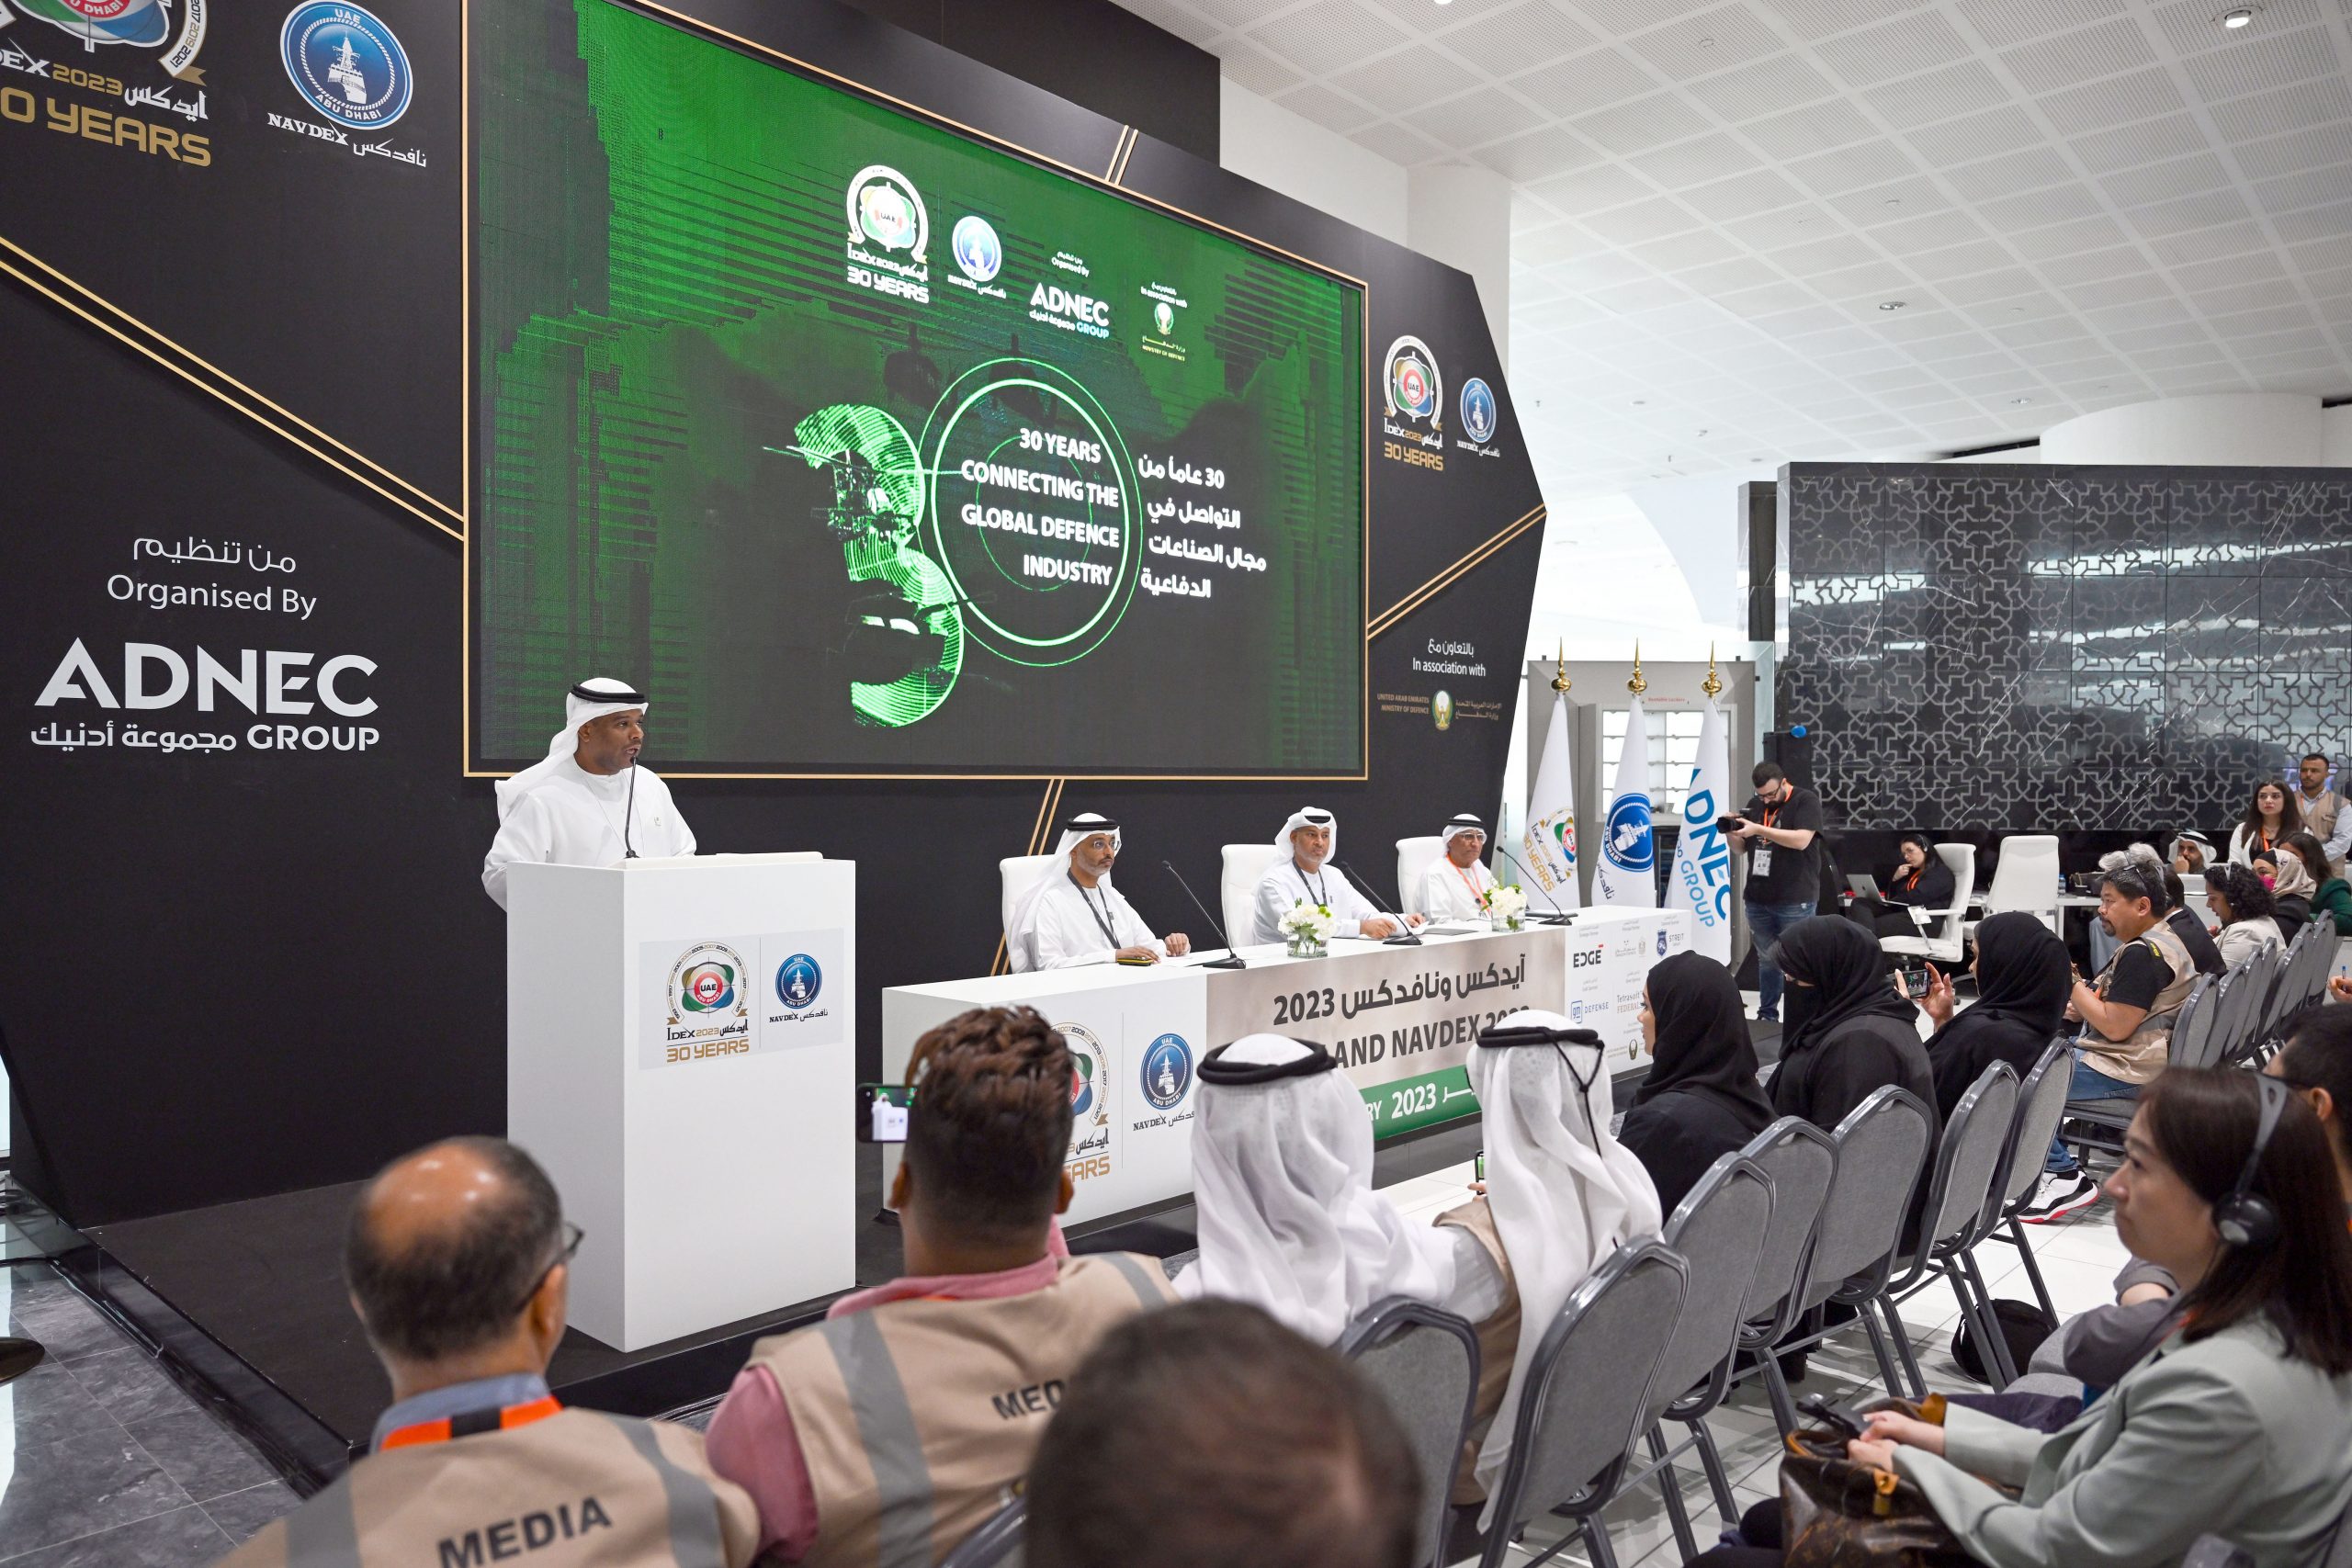 AED23.34b worth of total deals signed during IDEX and NAVDEX 2023